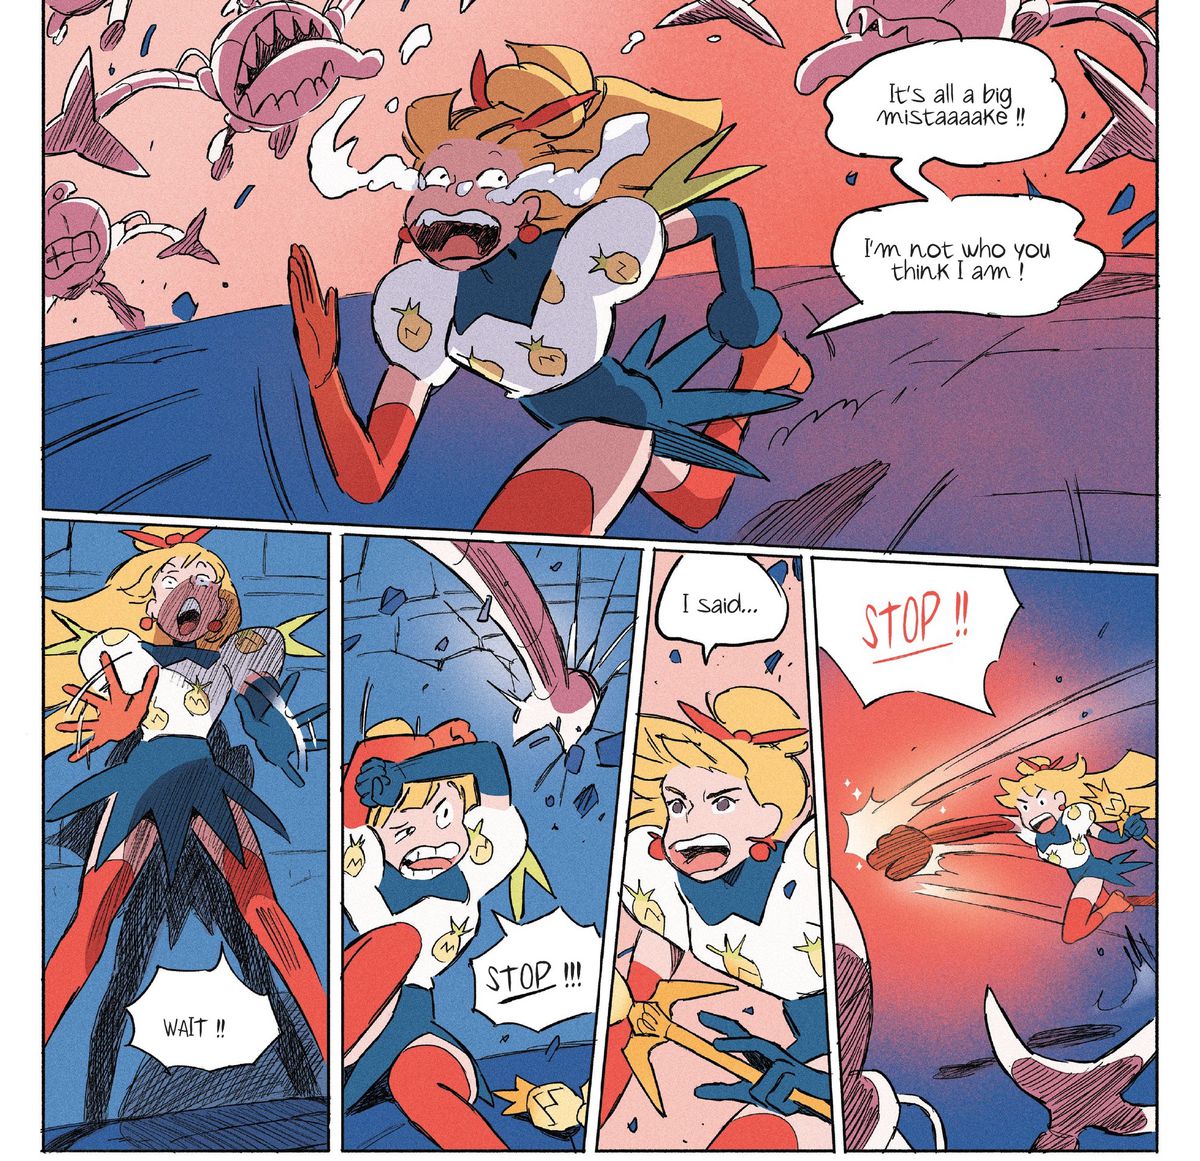 “It’s all a big mistaaaake!! I’m not who you think I am!” wails a blonde magical girl in a pineapple themed outfit, as she is pursued by monsters. Cornered, she finally lashes out with a punch in Flavor Girls #1 (2022). 